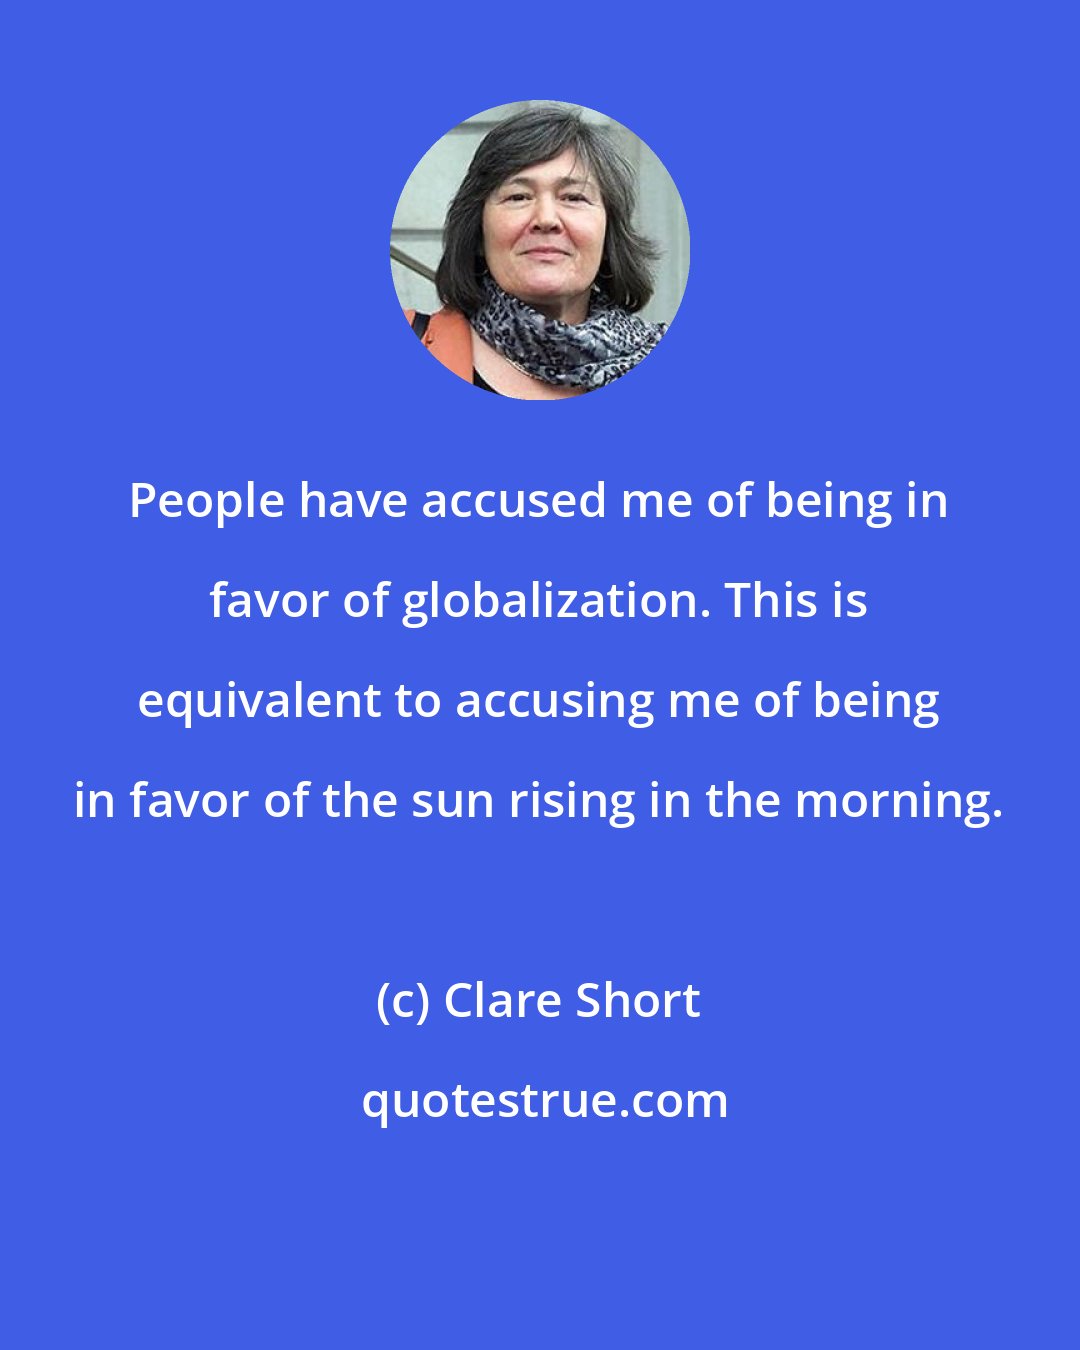 Clare Short: People have accused me of being in favor of globalization. This is equivalent to accusing me of being in favor of the sun rising in the morning.